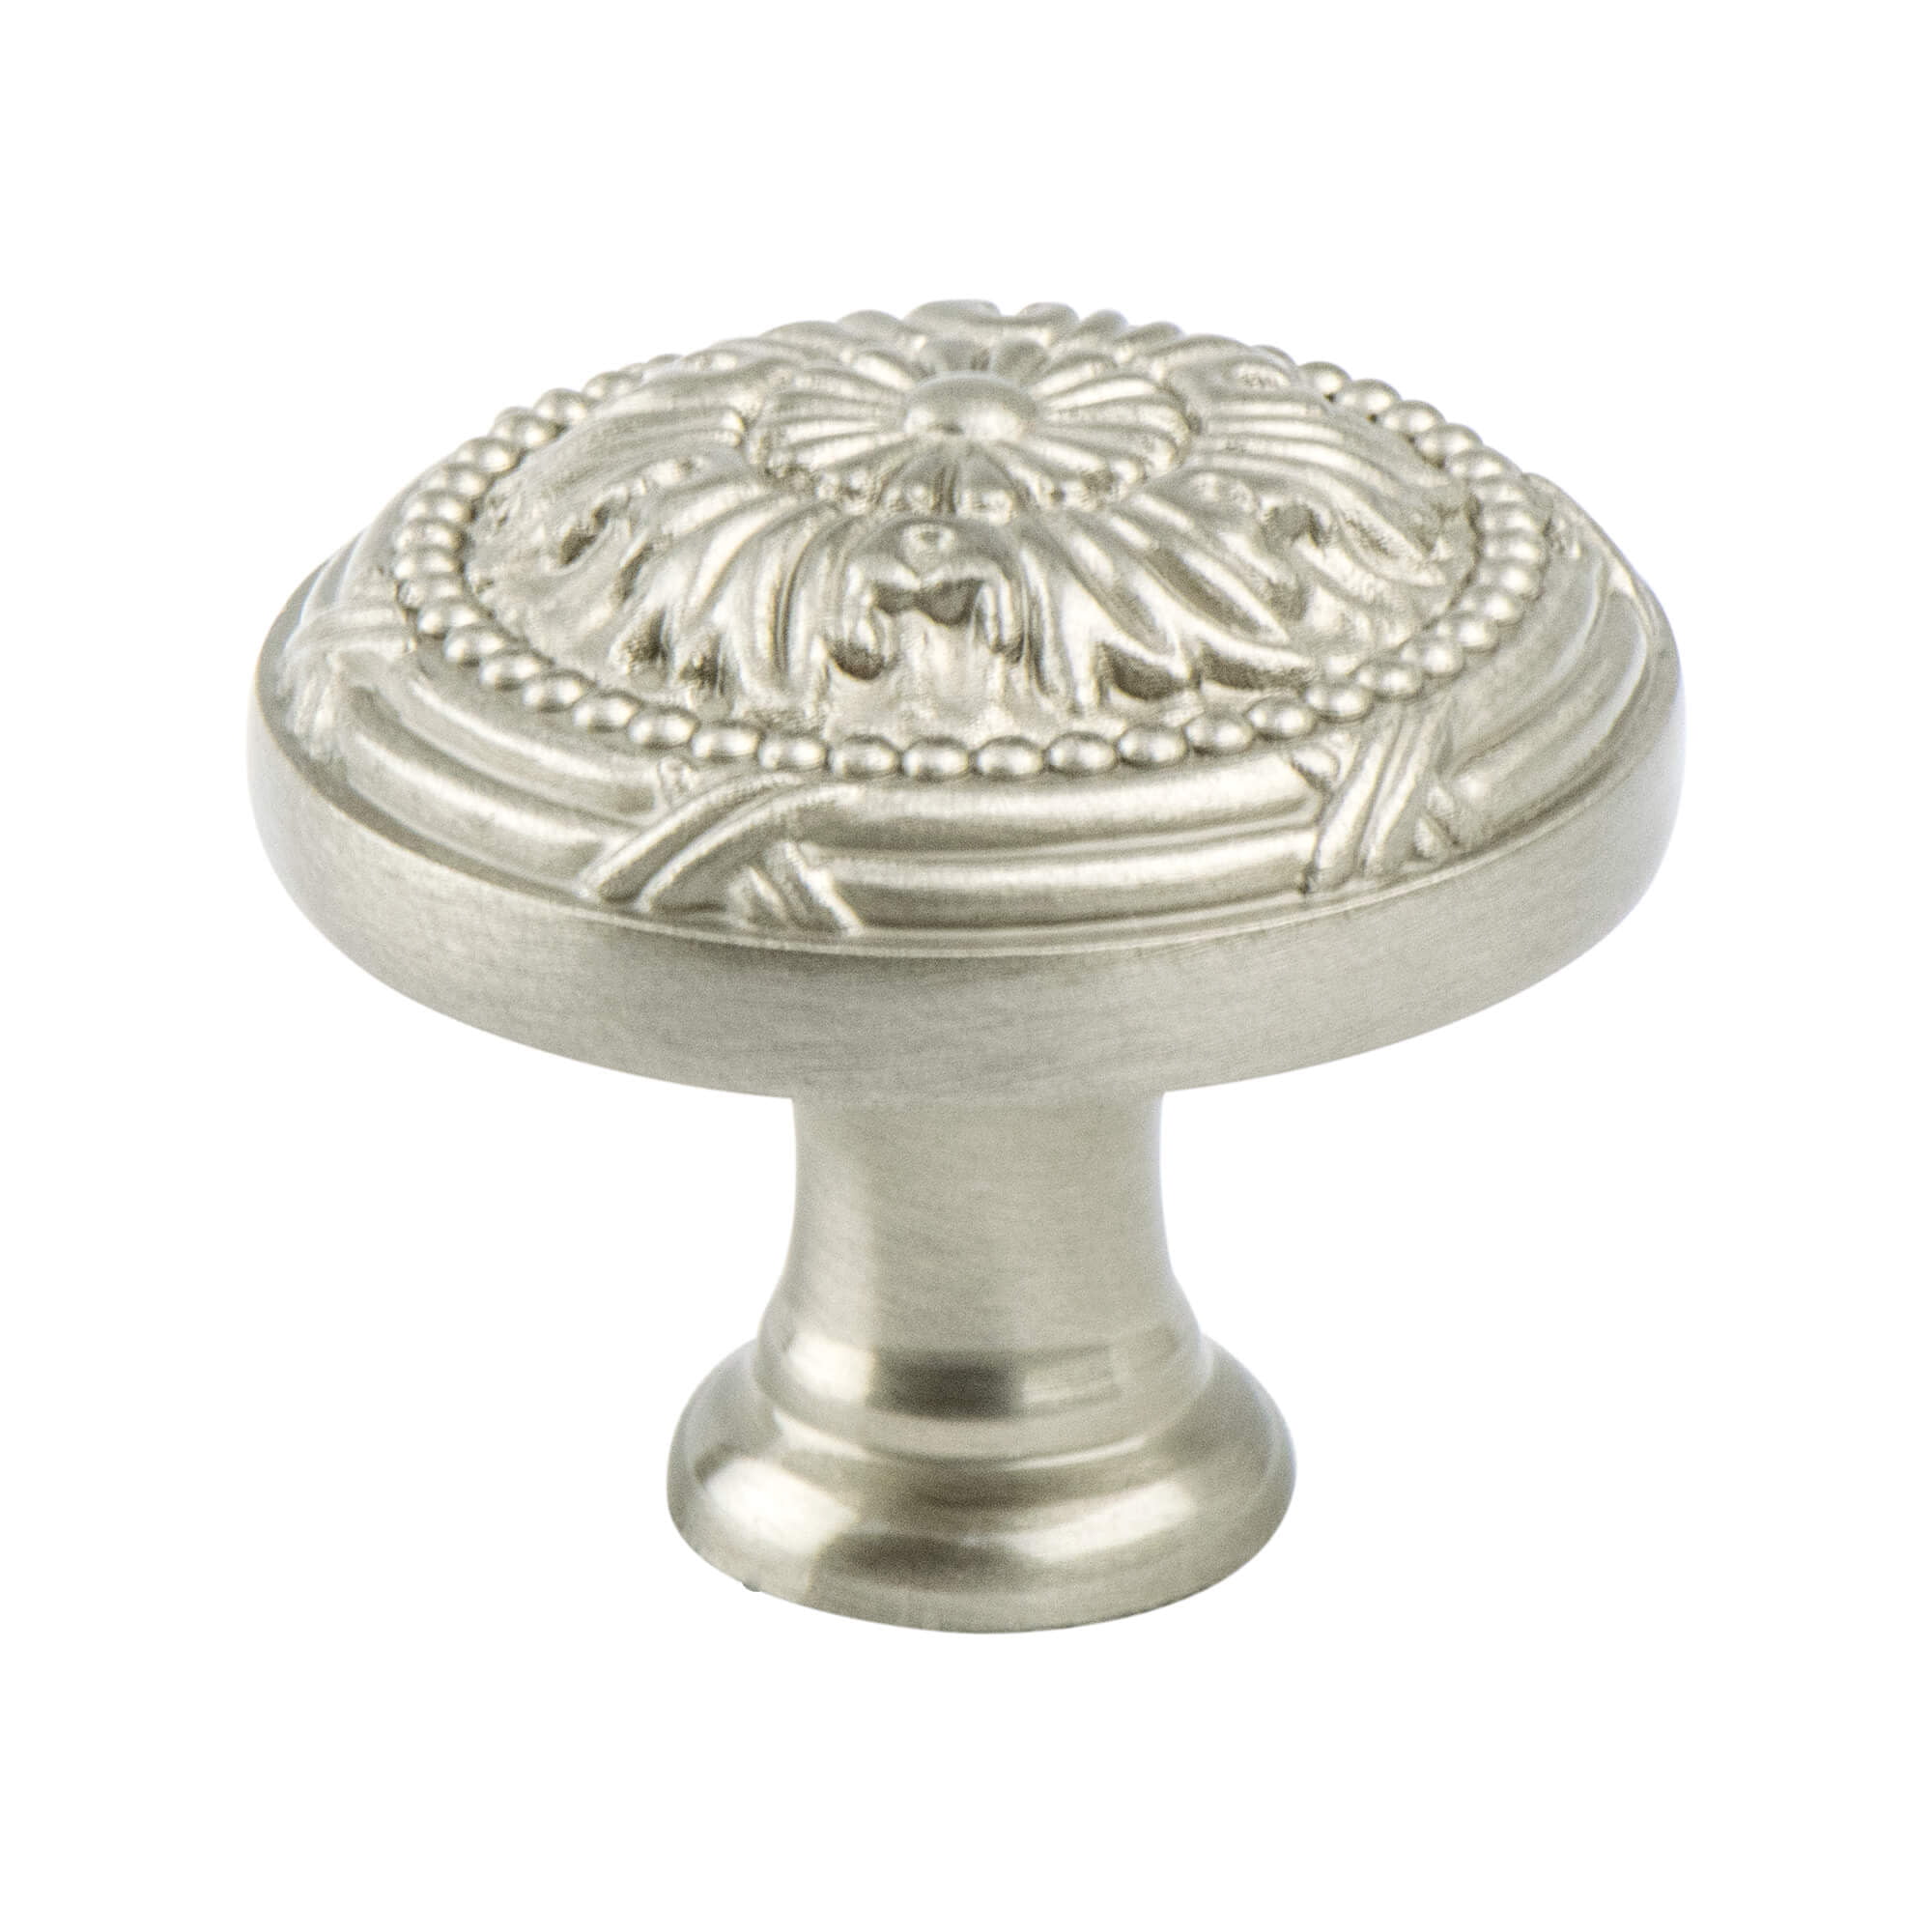 8255-1bpn-p 32 Mm Dia. Toccata Knob With Brushed Nickel